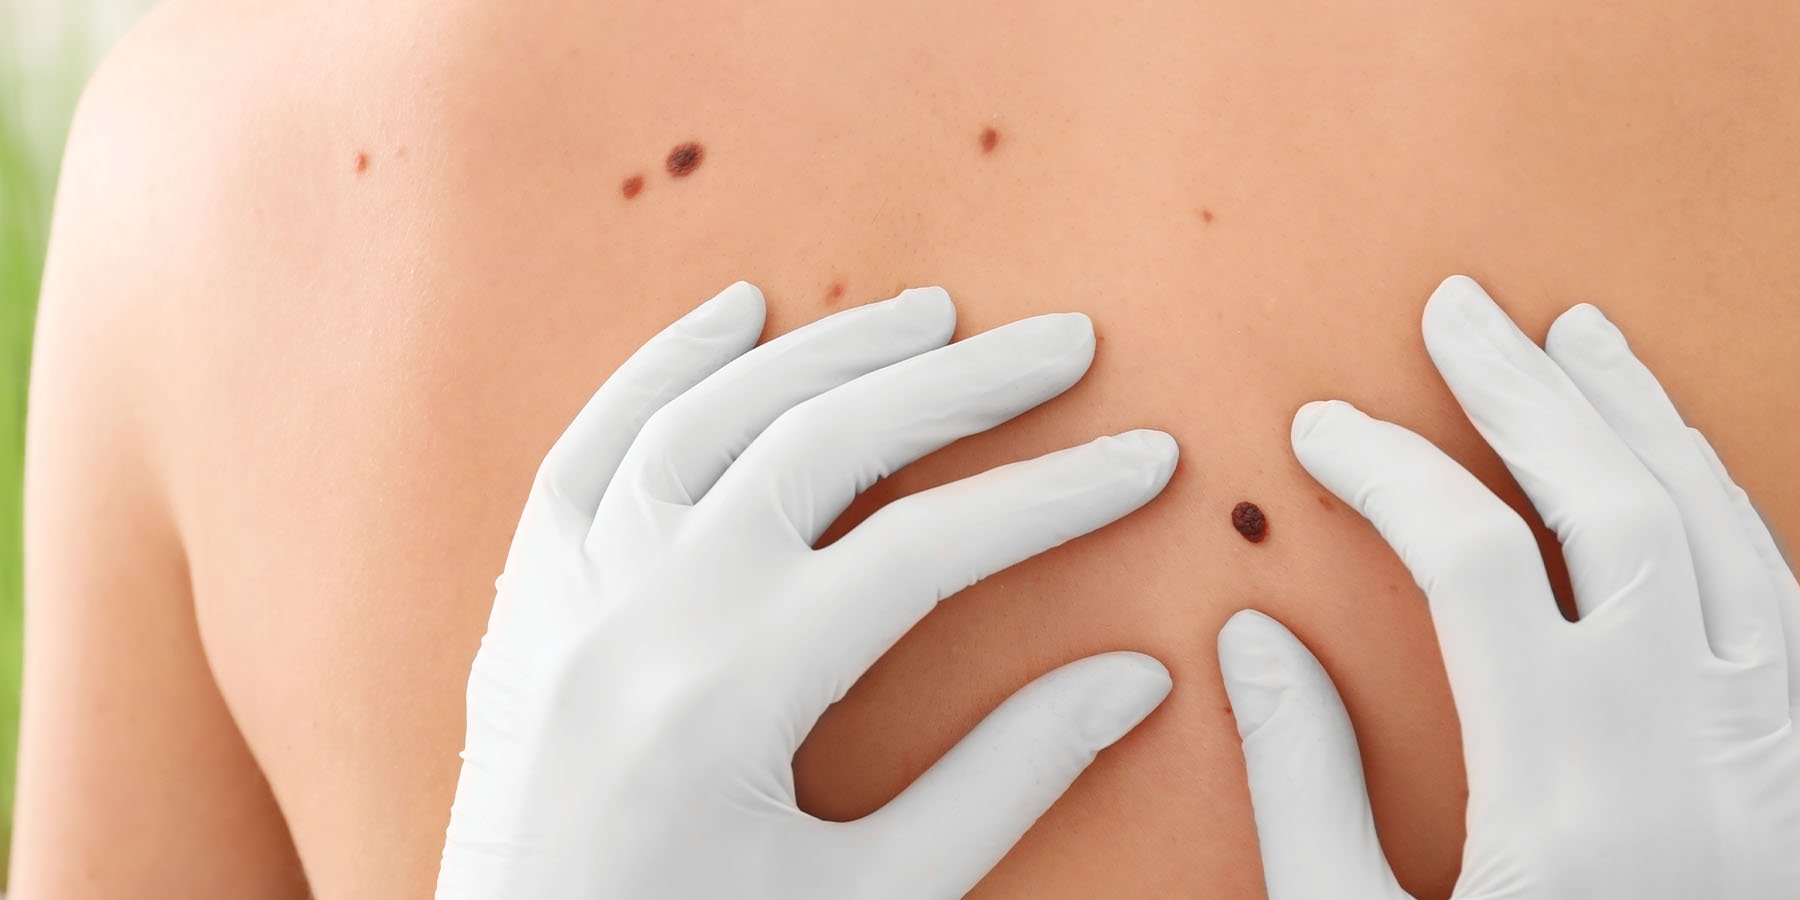 doctor looking over moles on a persons back